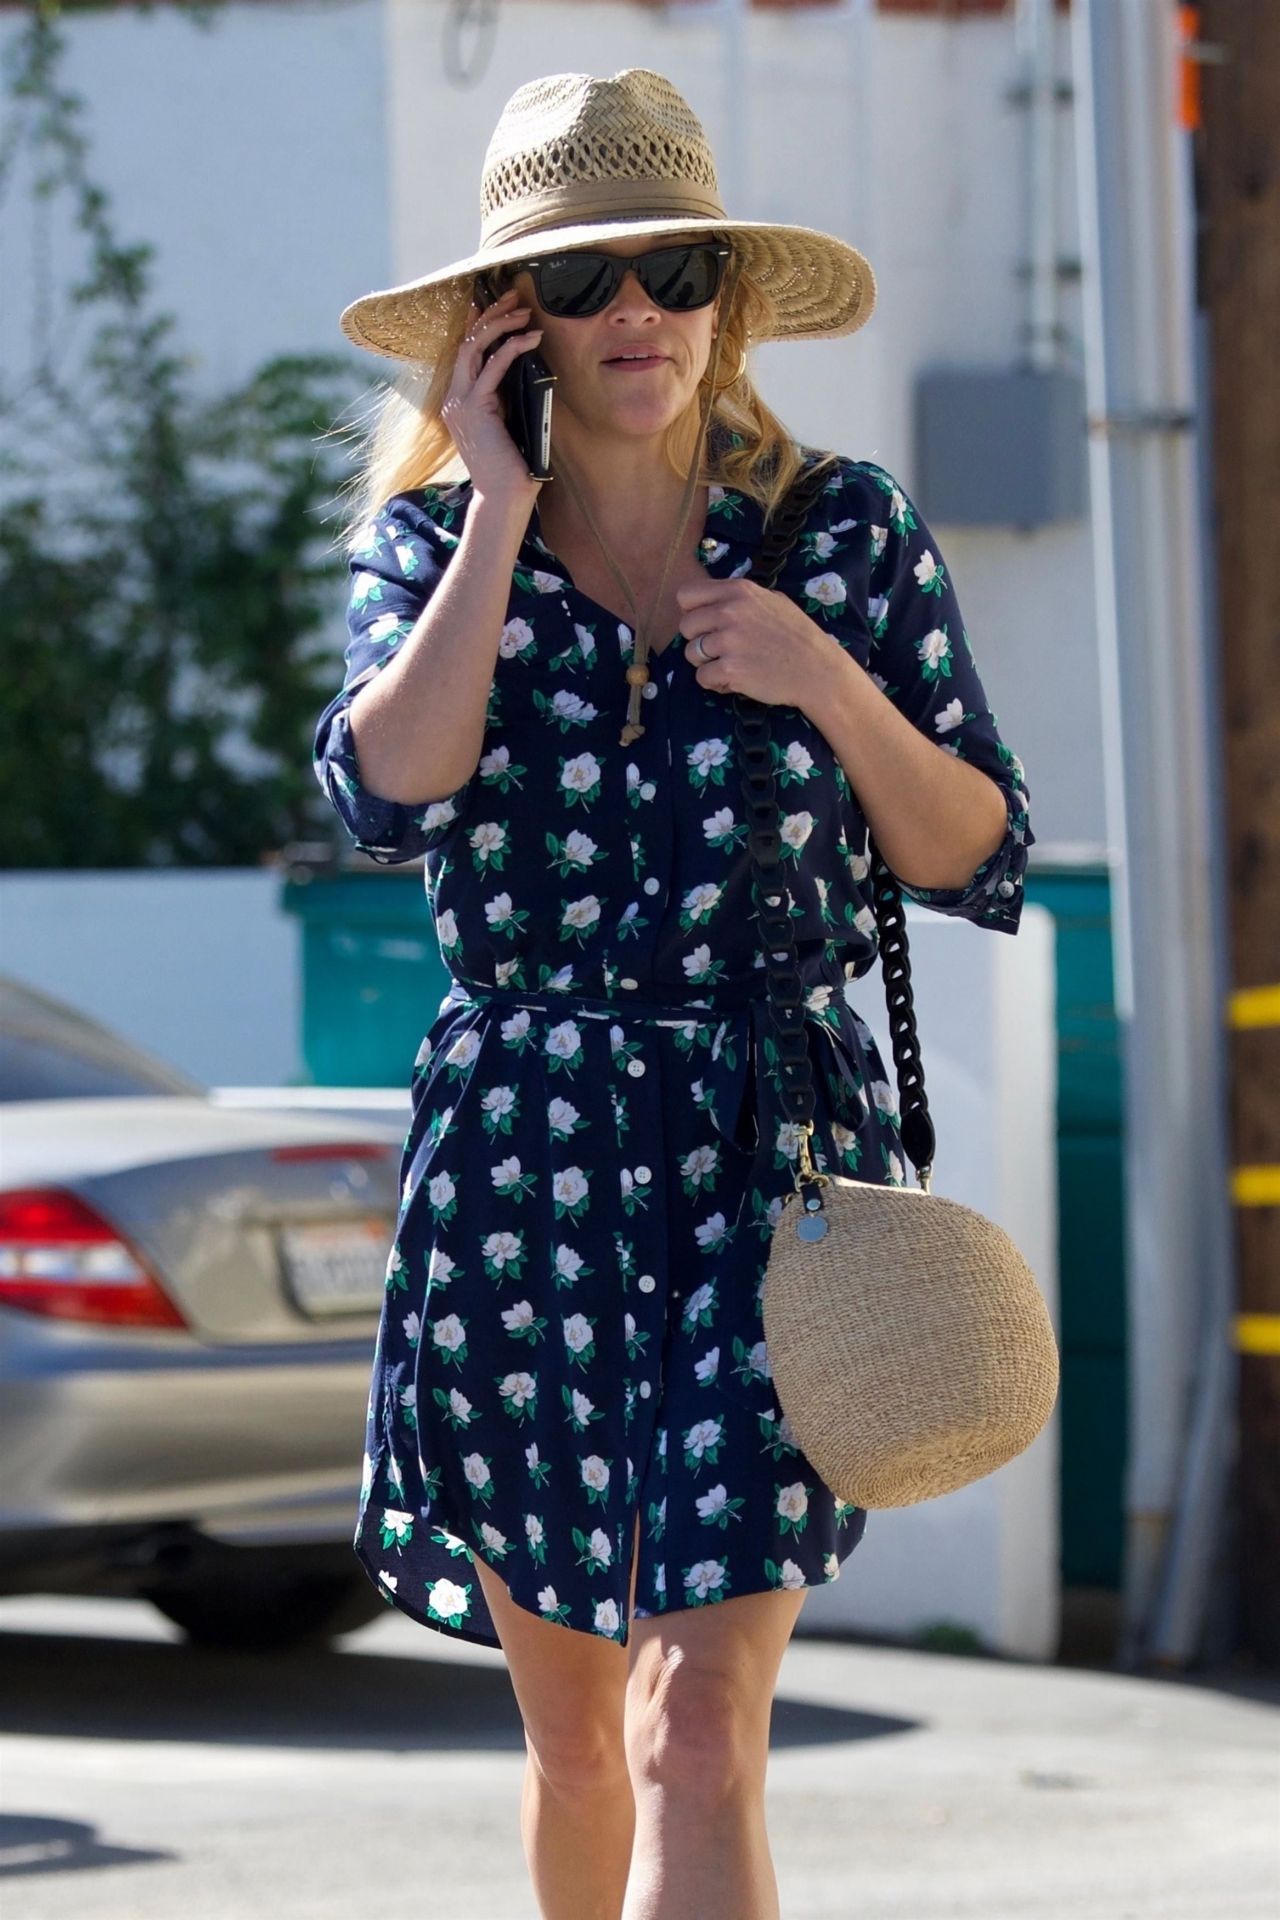 reese-witherspoon-at-the-beauty-park-medical-spa-in-santa-monica-10-20-2018-5.jpg